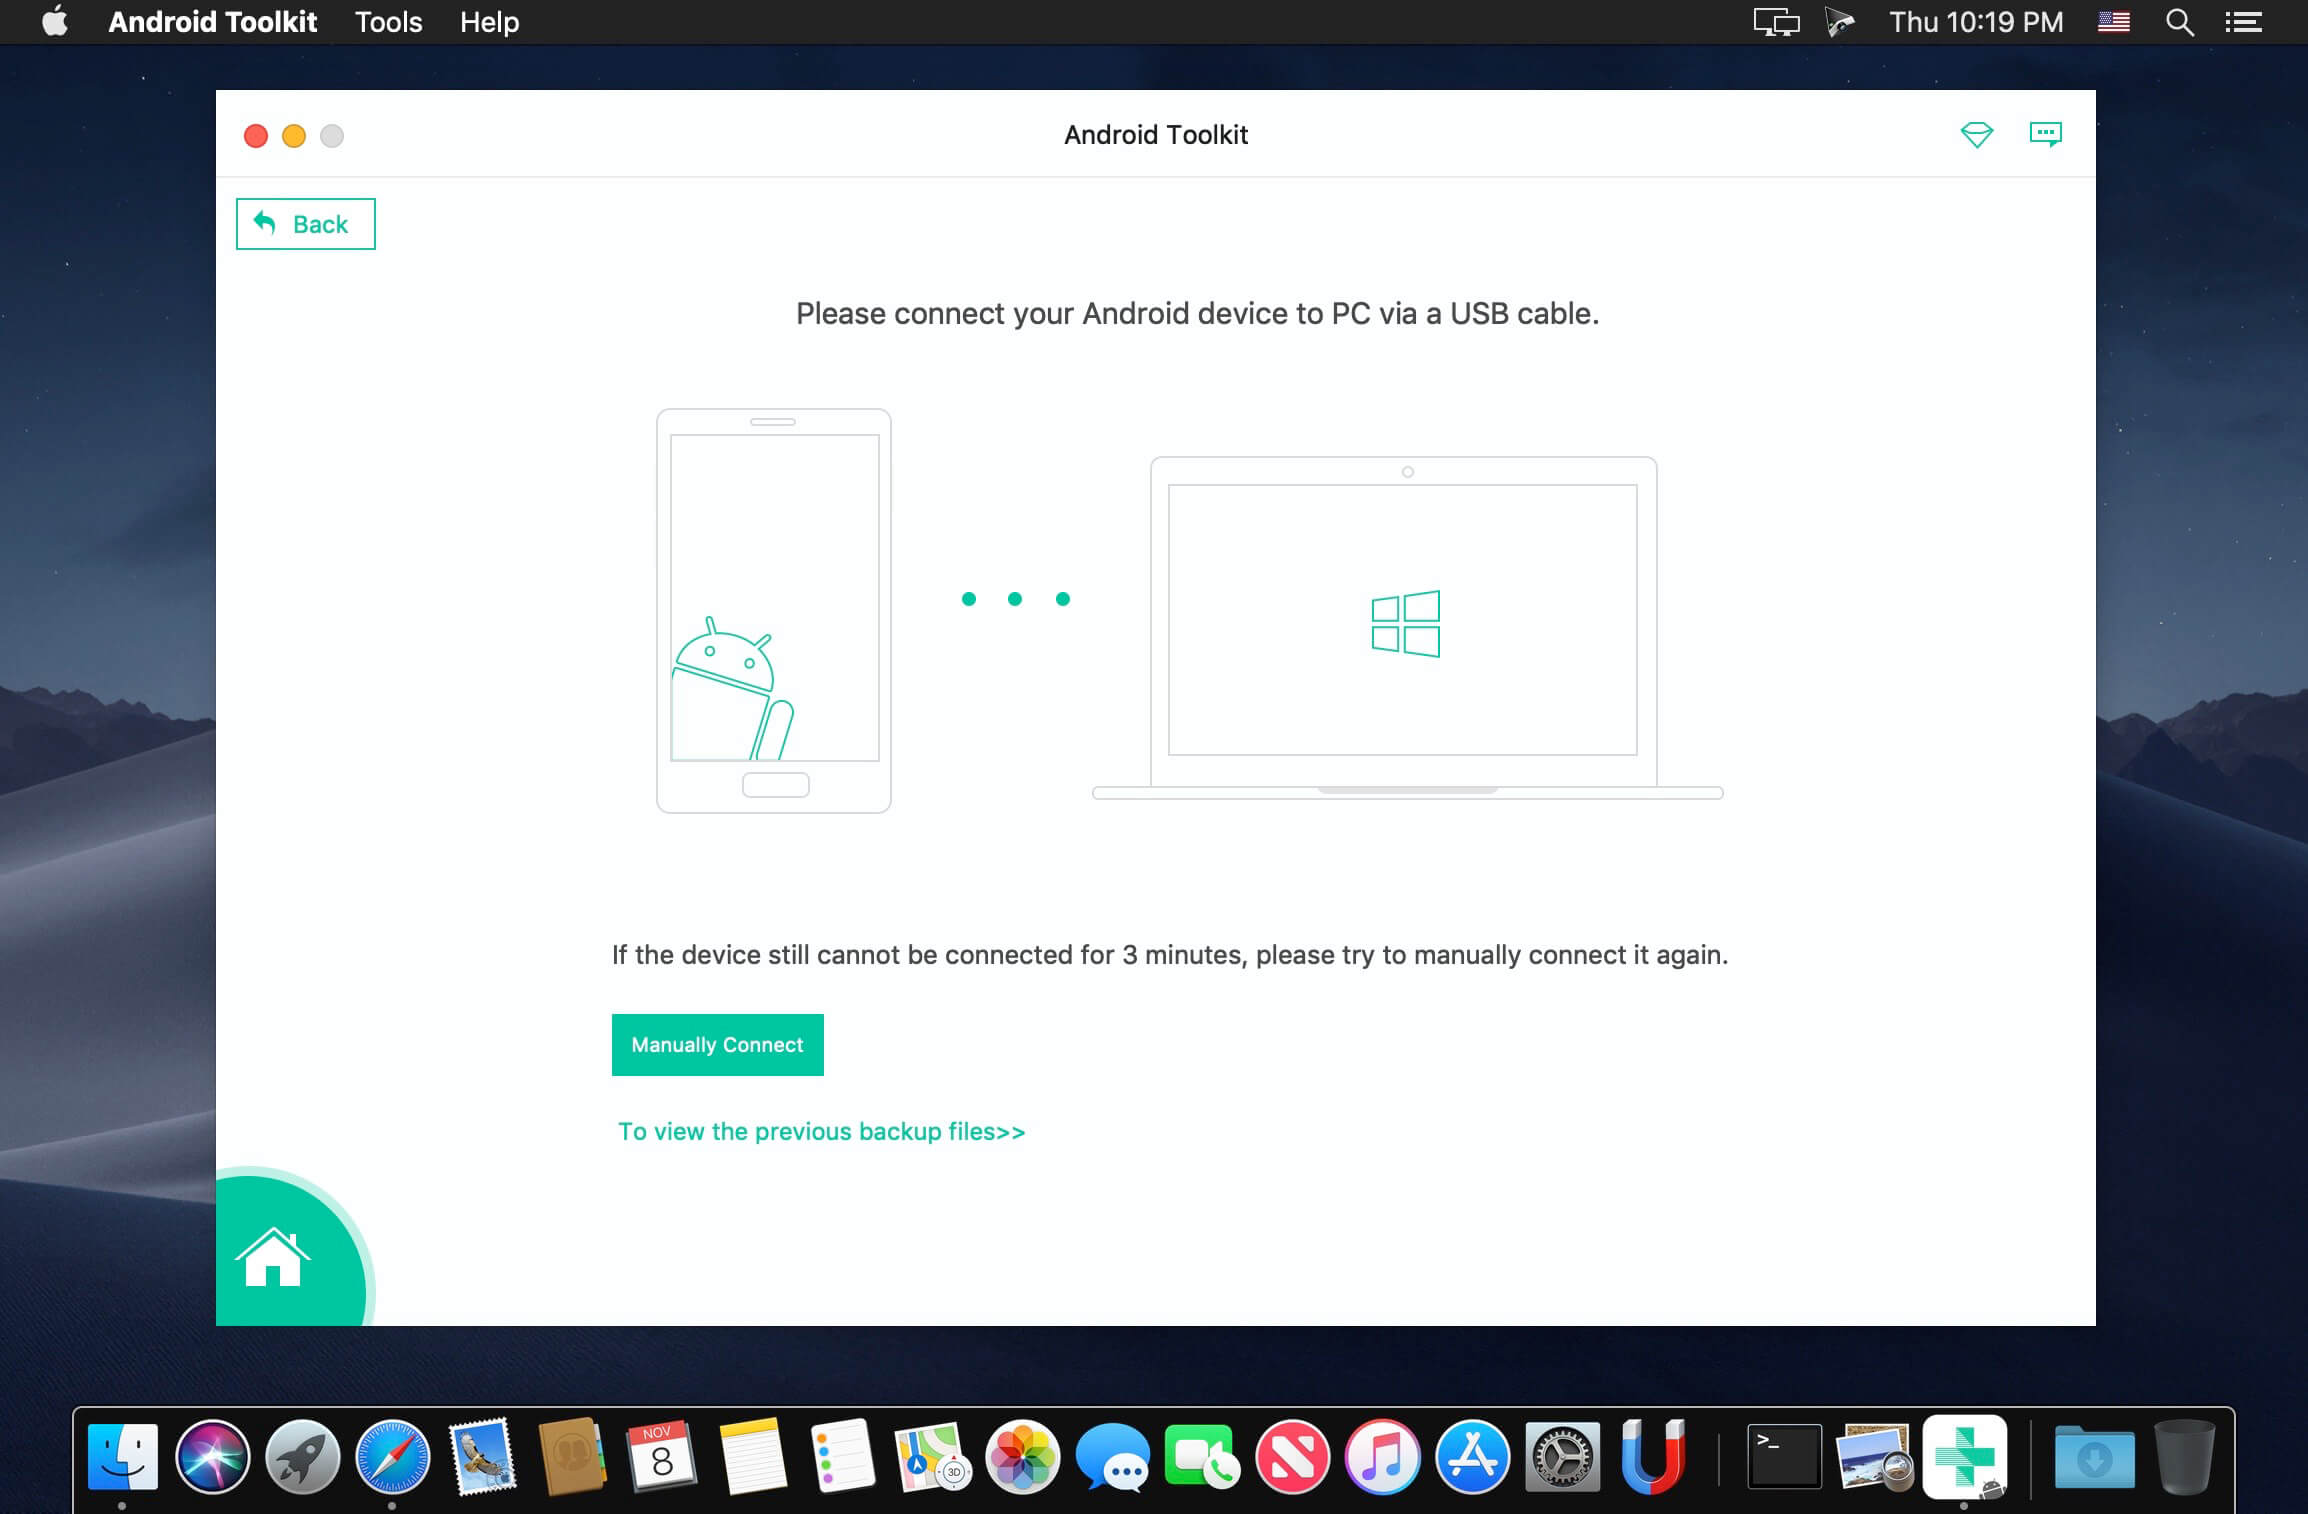 download the last version for mac Apeaksoft Android Toolkit 2.1.10